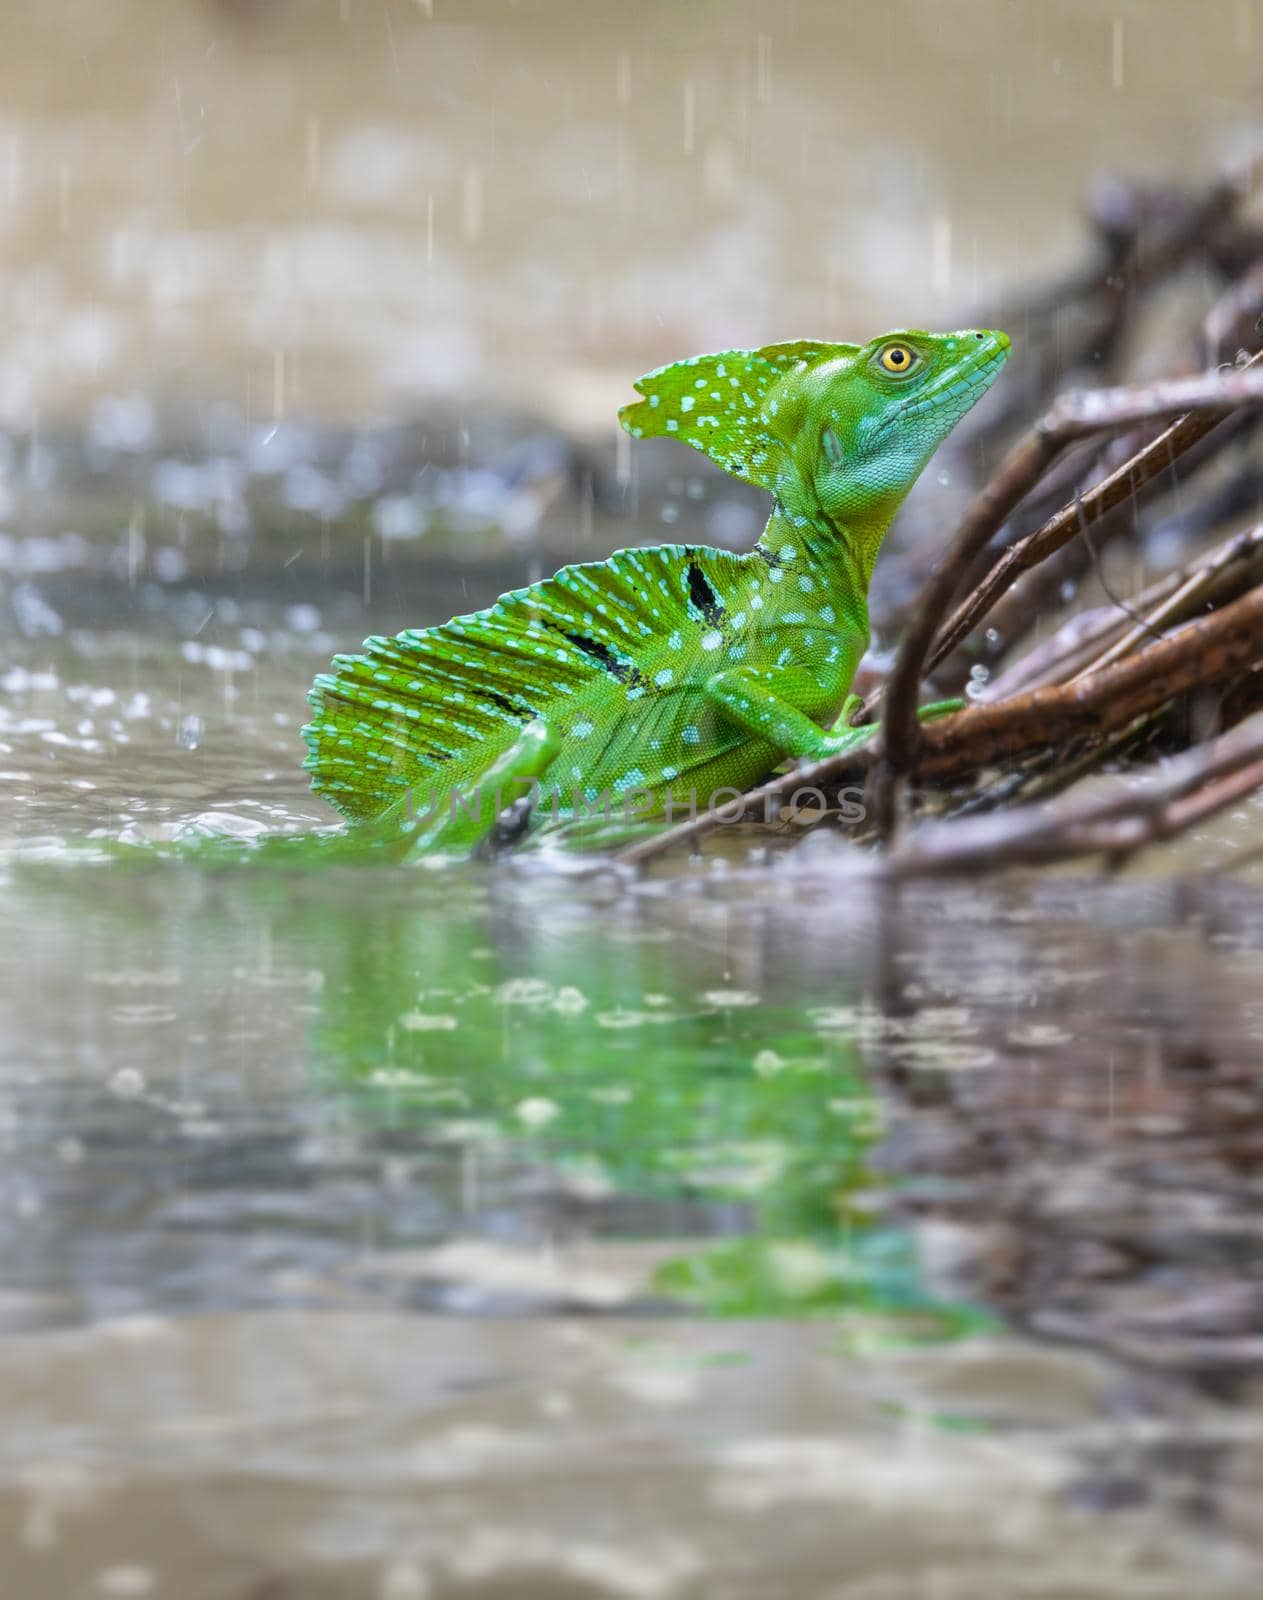 Plumed green basilisk (Basiliscus plumifrons), sitting on branch protruding from water with reflection, rainy tropical weather with raindrops in water. Refugio de Vida Silvestre Cano Negro, Costa Rica wildlife .